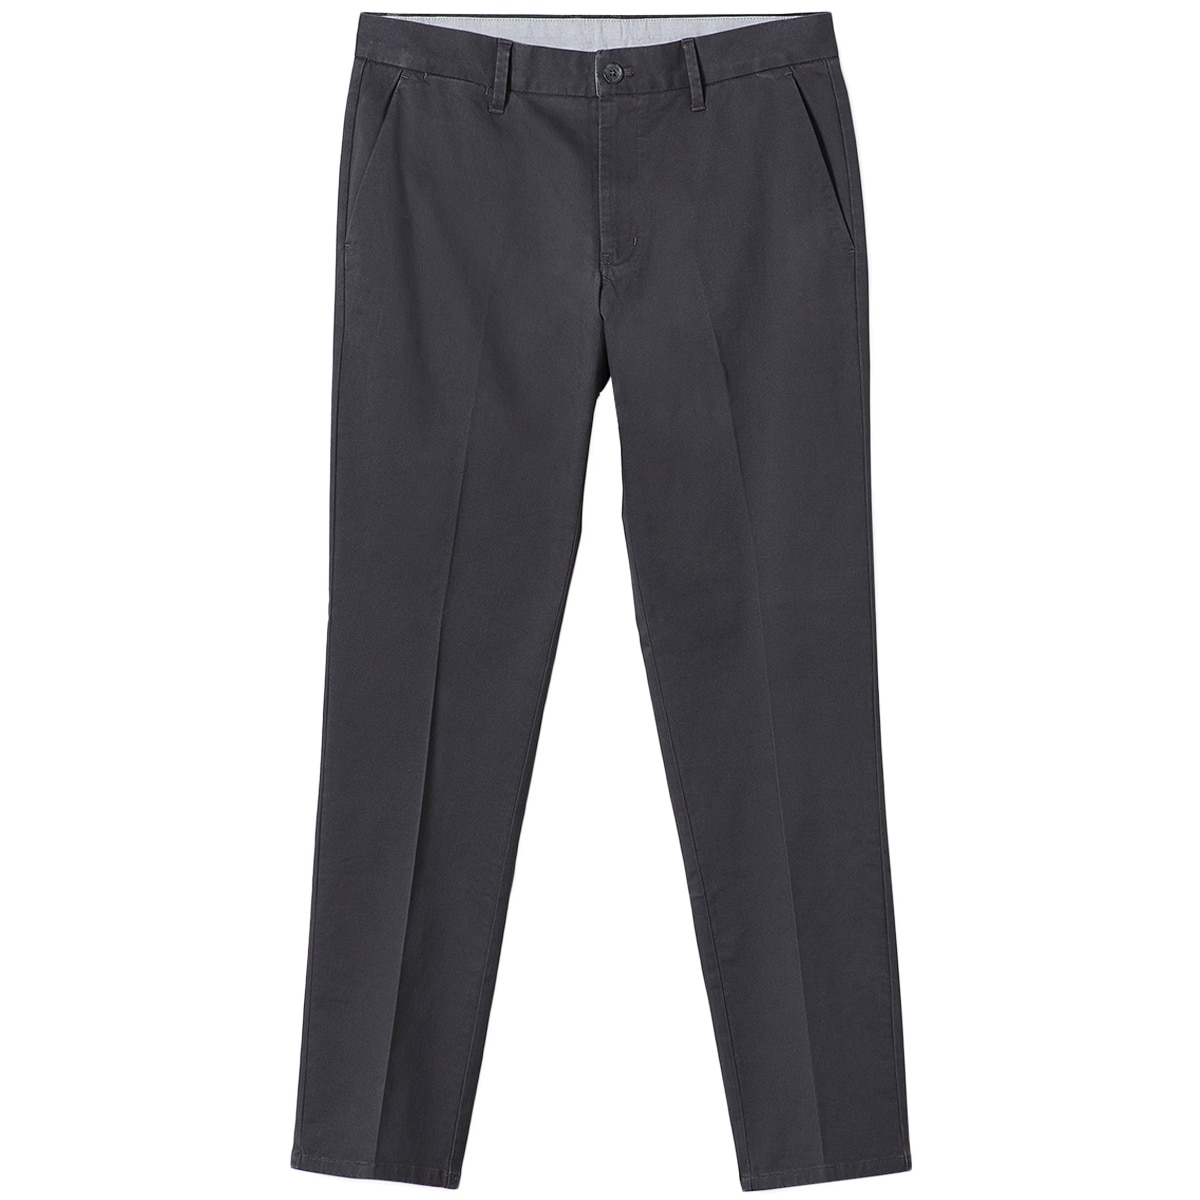 Buy > mens stretch chinos > in stock